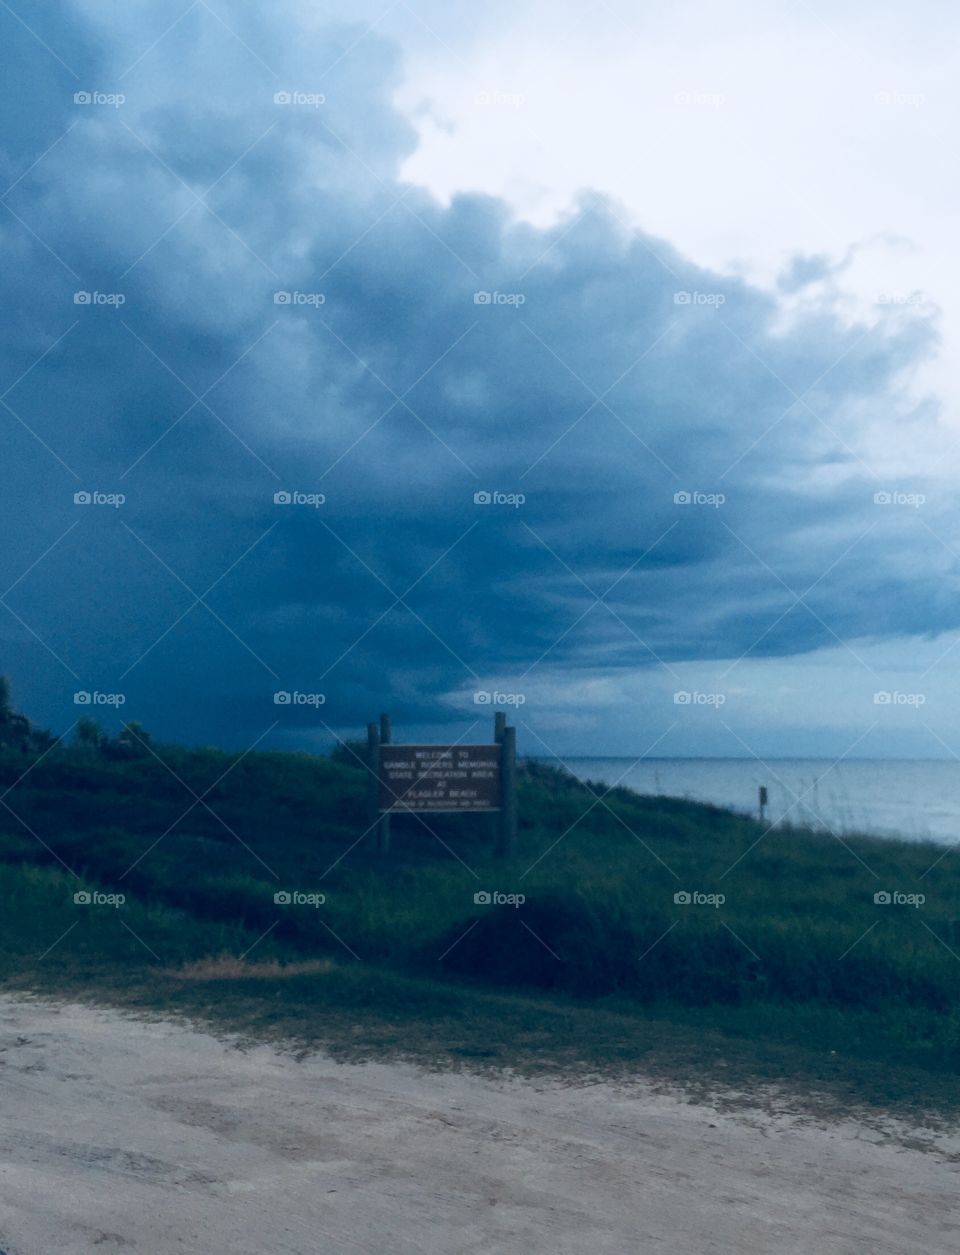 Afternoon storms moving thru Flagler and Ormond Beach. Taken at AIA, Gamble Rodgers State Park oceanfront to the AtlanticOcean.